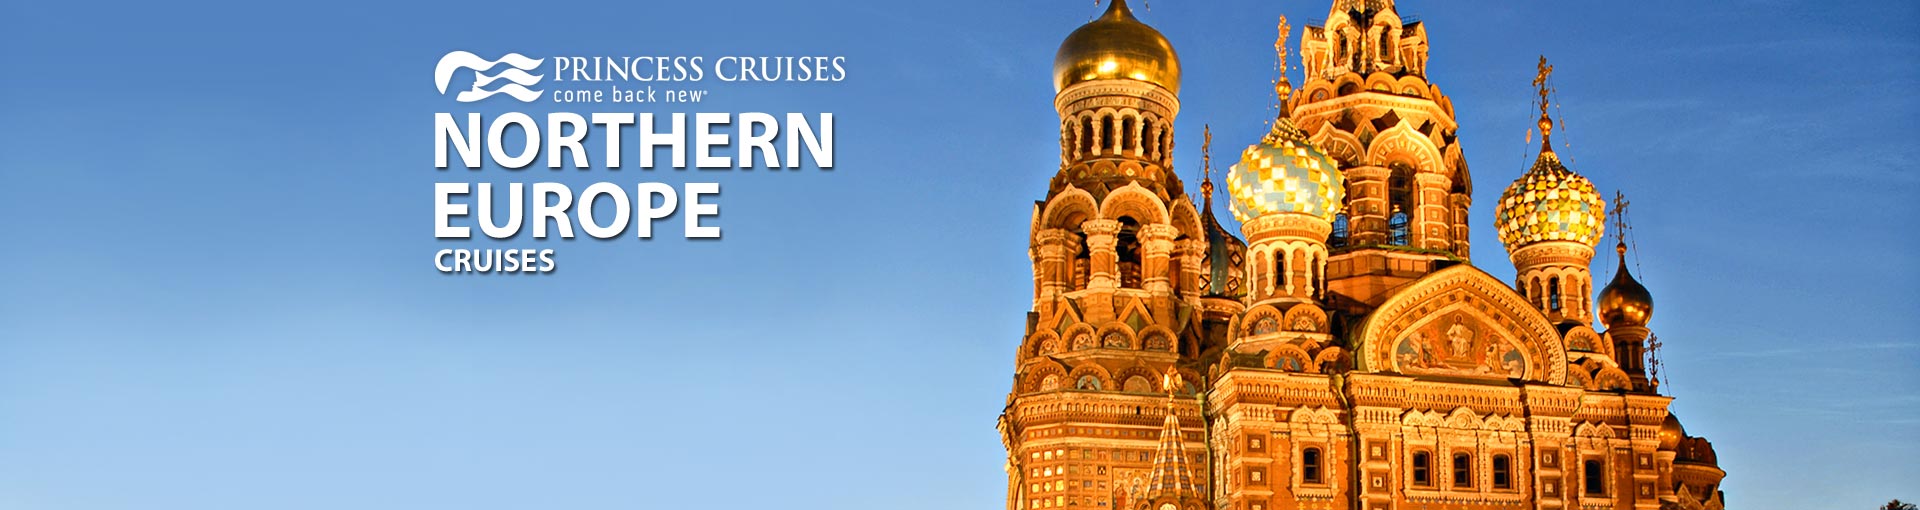 Luxury cruise lines baltic sea map, last minute cruise deals from